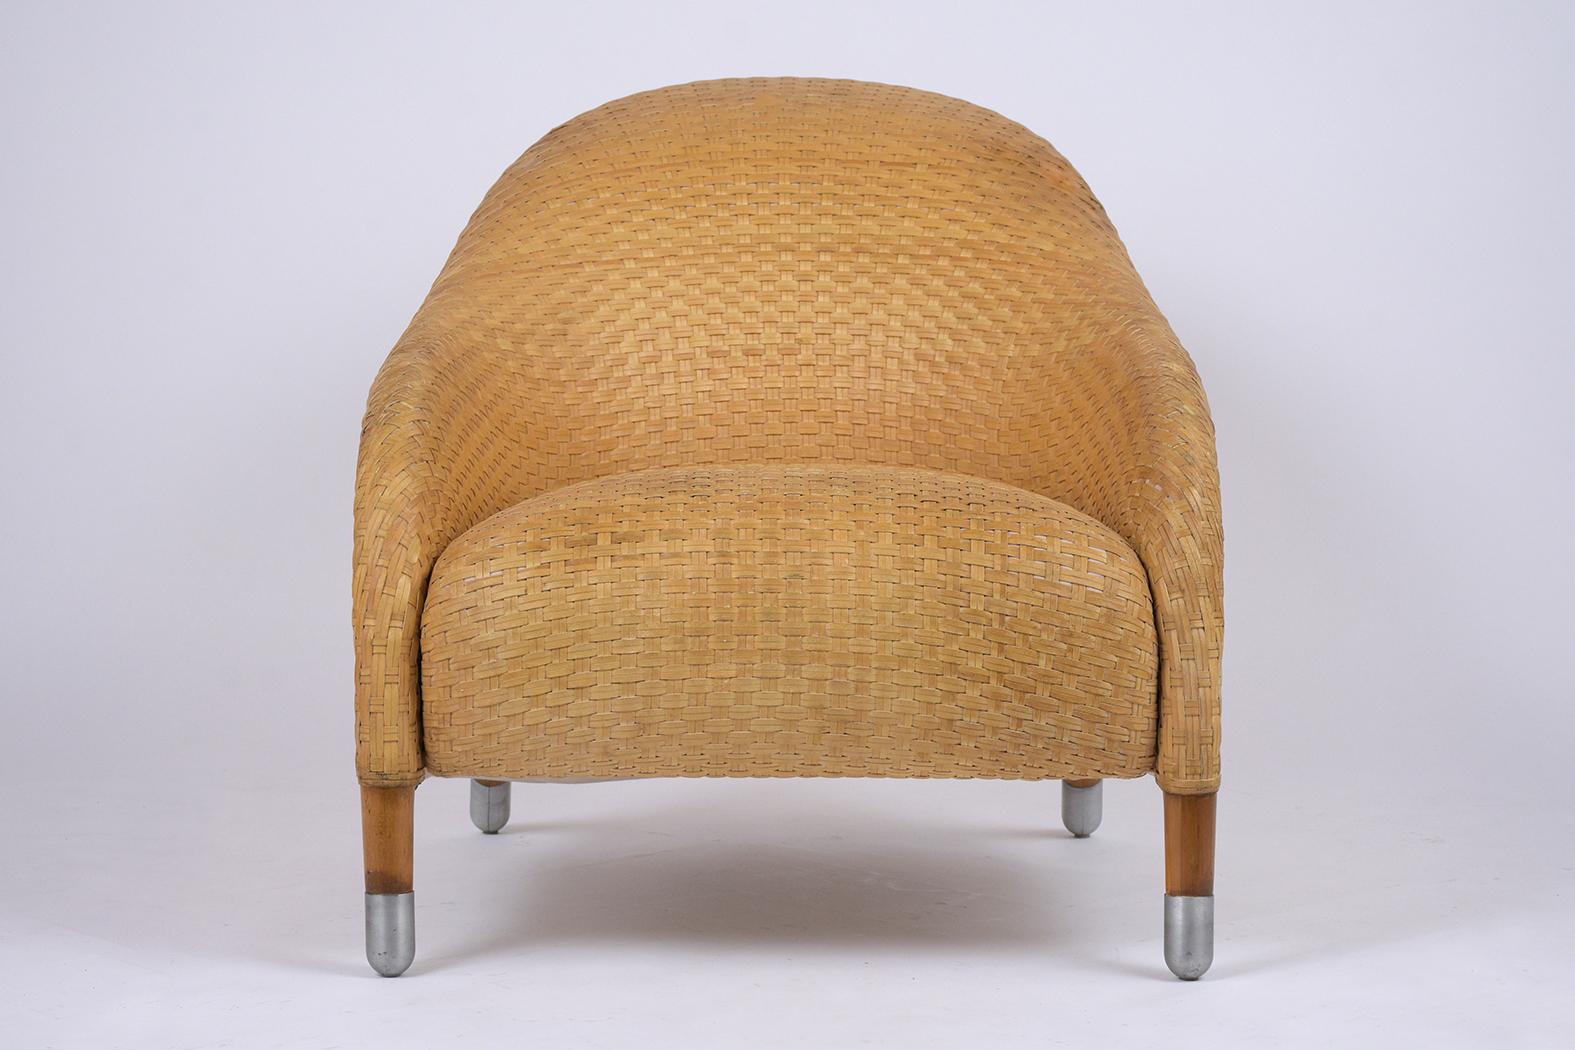 Hand-Crafted Pair of Woven Leather Chairs